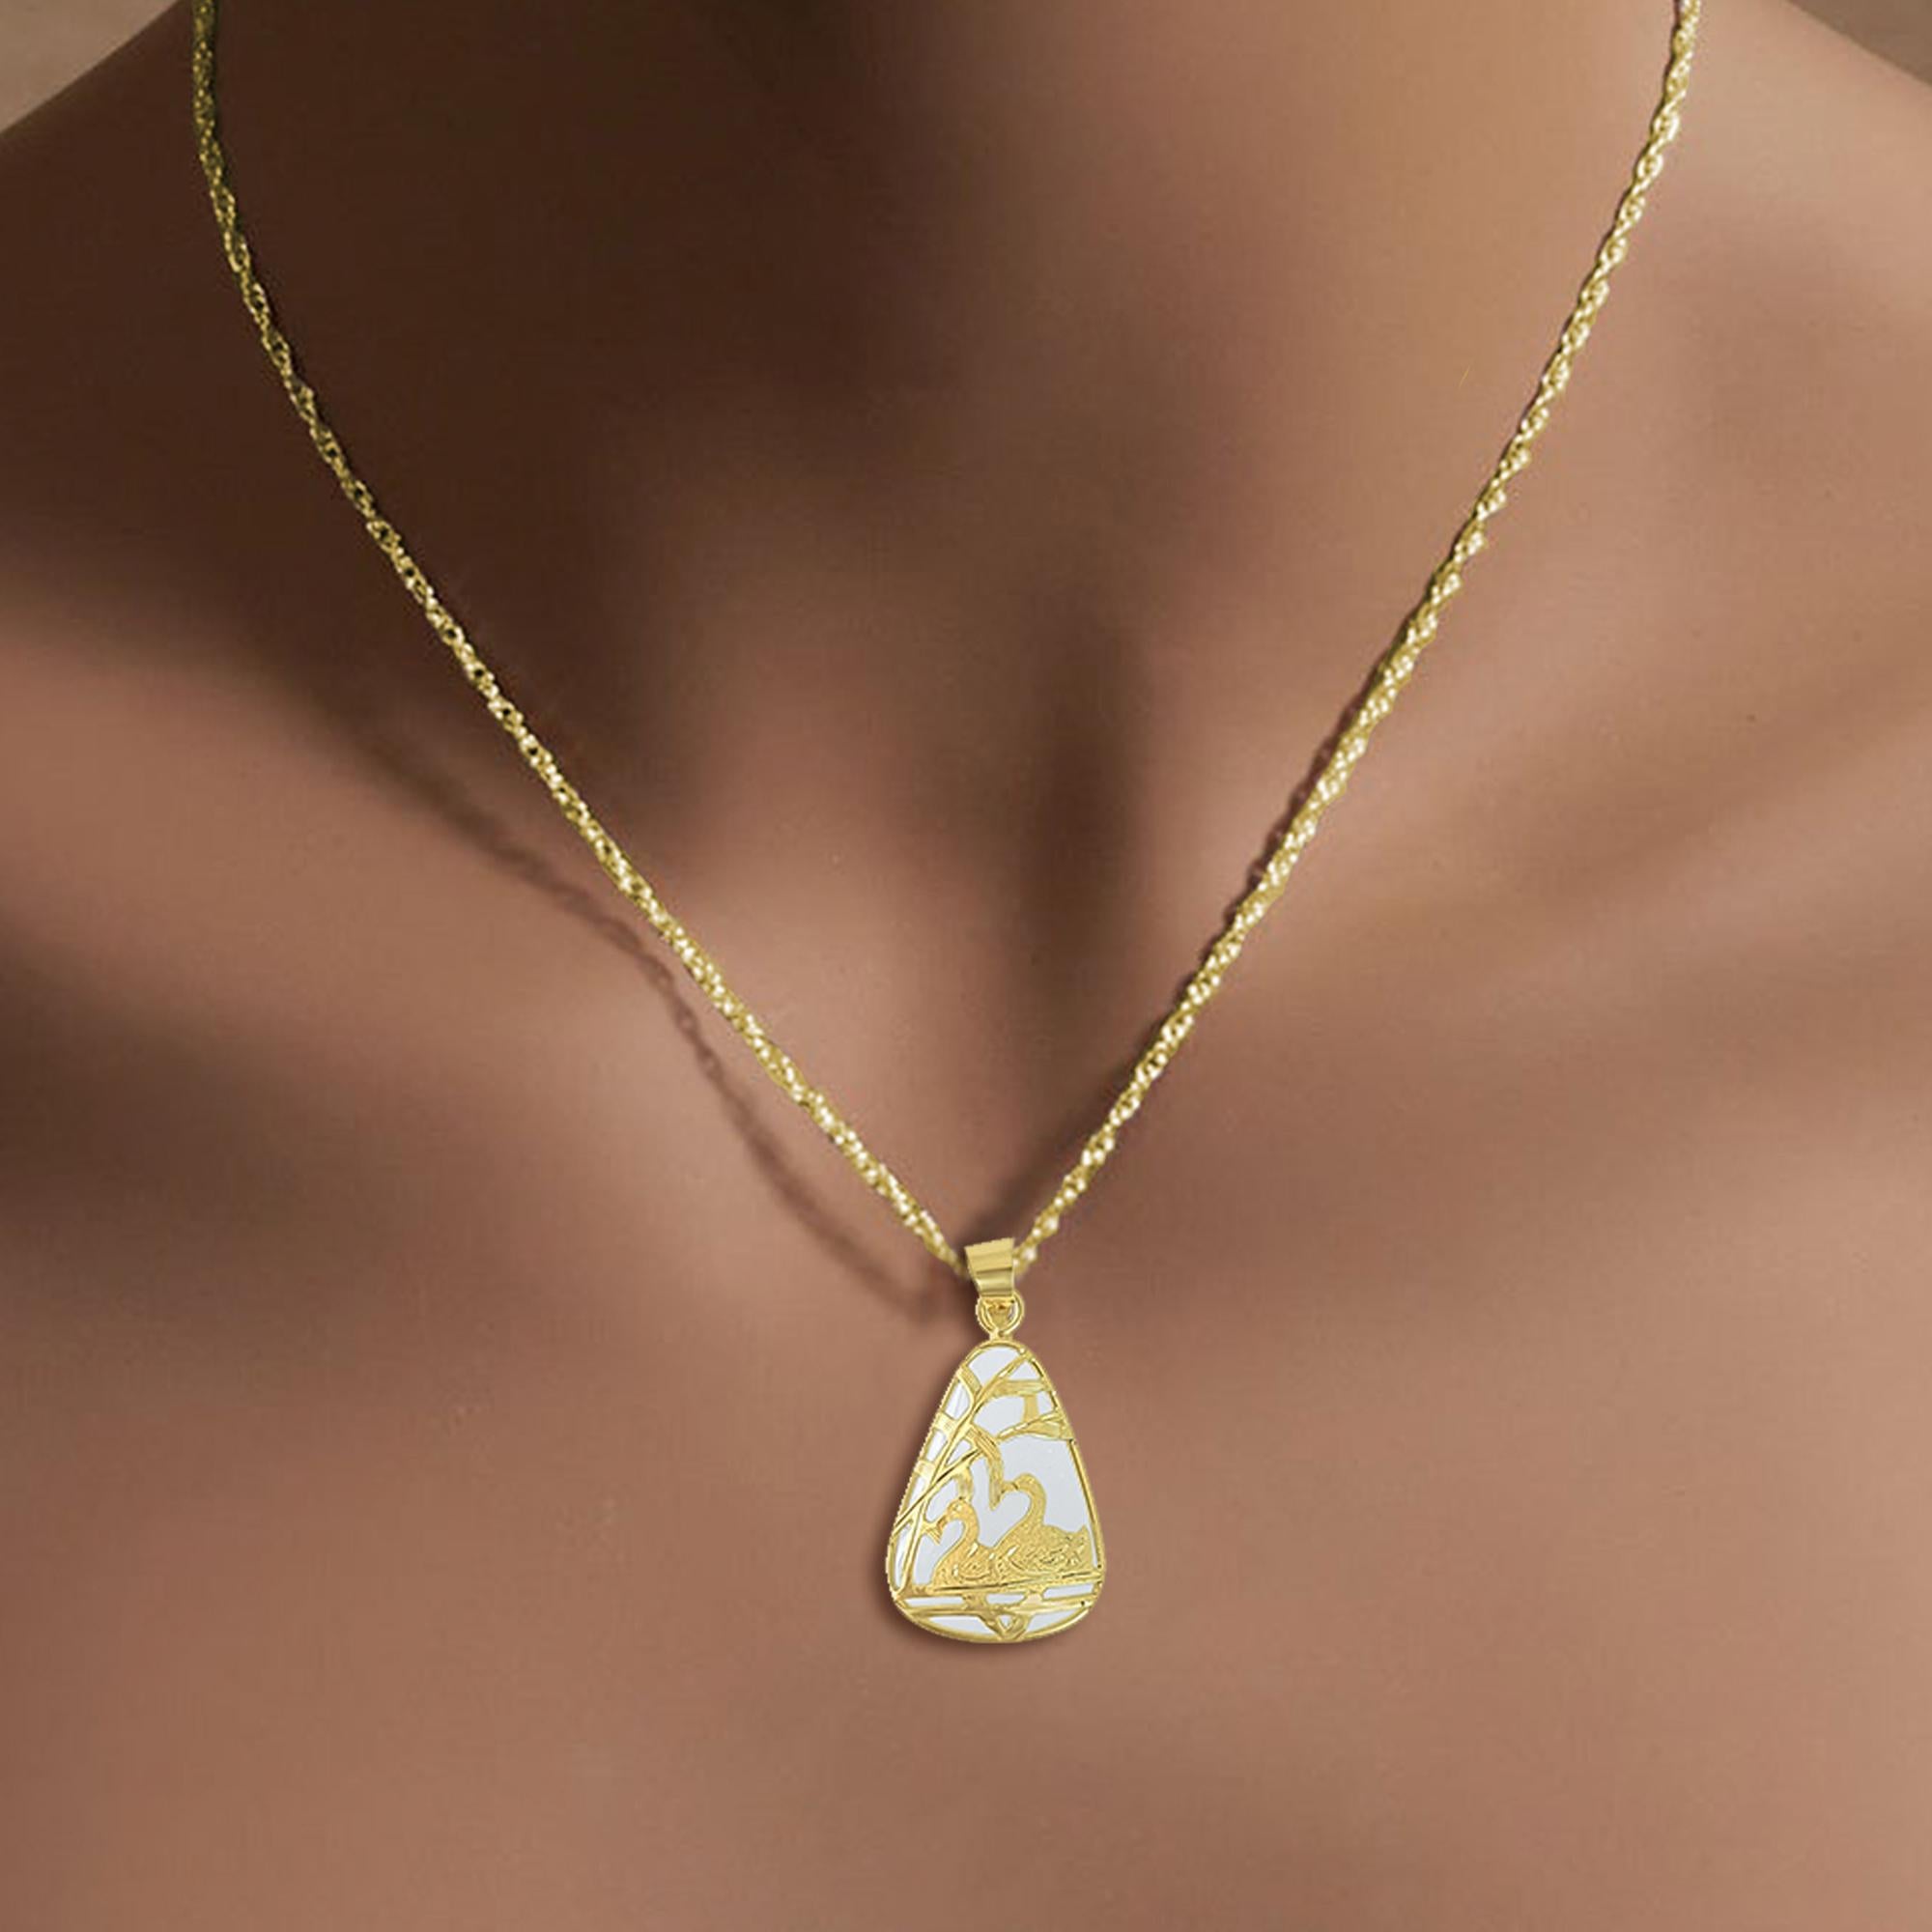 ♥ Product Summary ♥

Main Stone: Natural Genuine Jadeite with Swan Design in gold
Metal Purity: 14K Yellow Gold  
Weight: 2 grams
Dimensions: 25mm x 13mm with bail
Stone Cut: Rounded Triangle